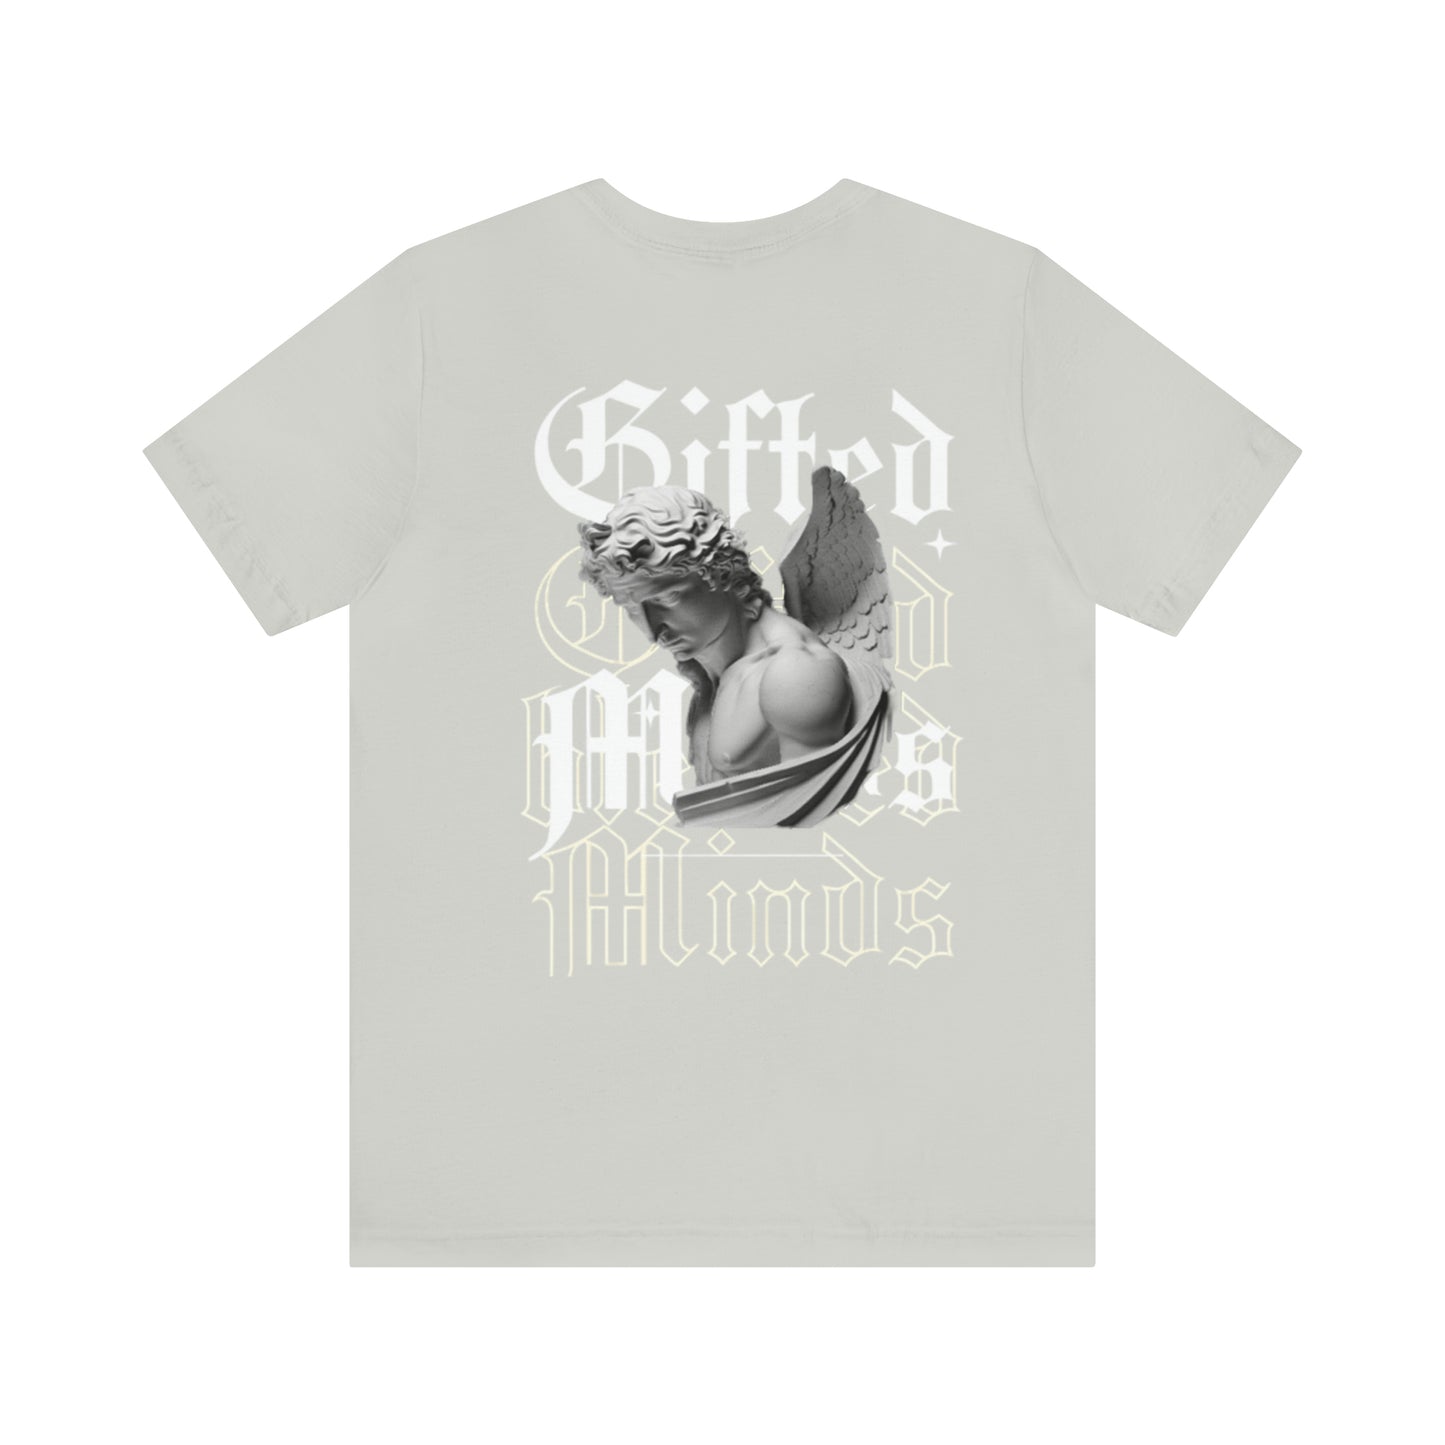 Gifted Minds Angel Short Sleeve Tee - GFTD MNDS